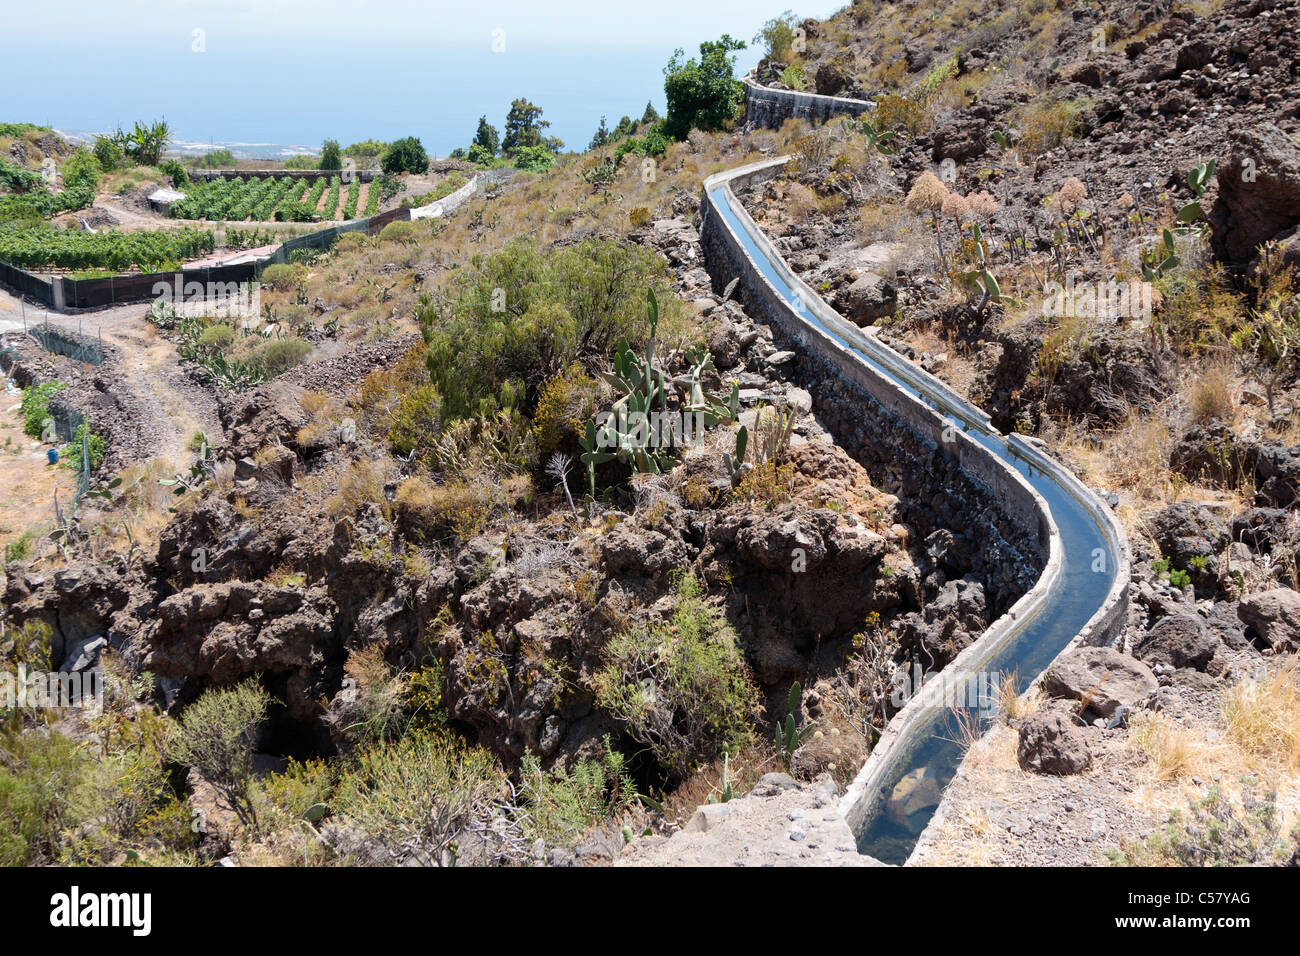 An open water channel carring water for crop irrigation in the Guia de Isora area of Tenerife, Canary Islands, Spain Stock Photo